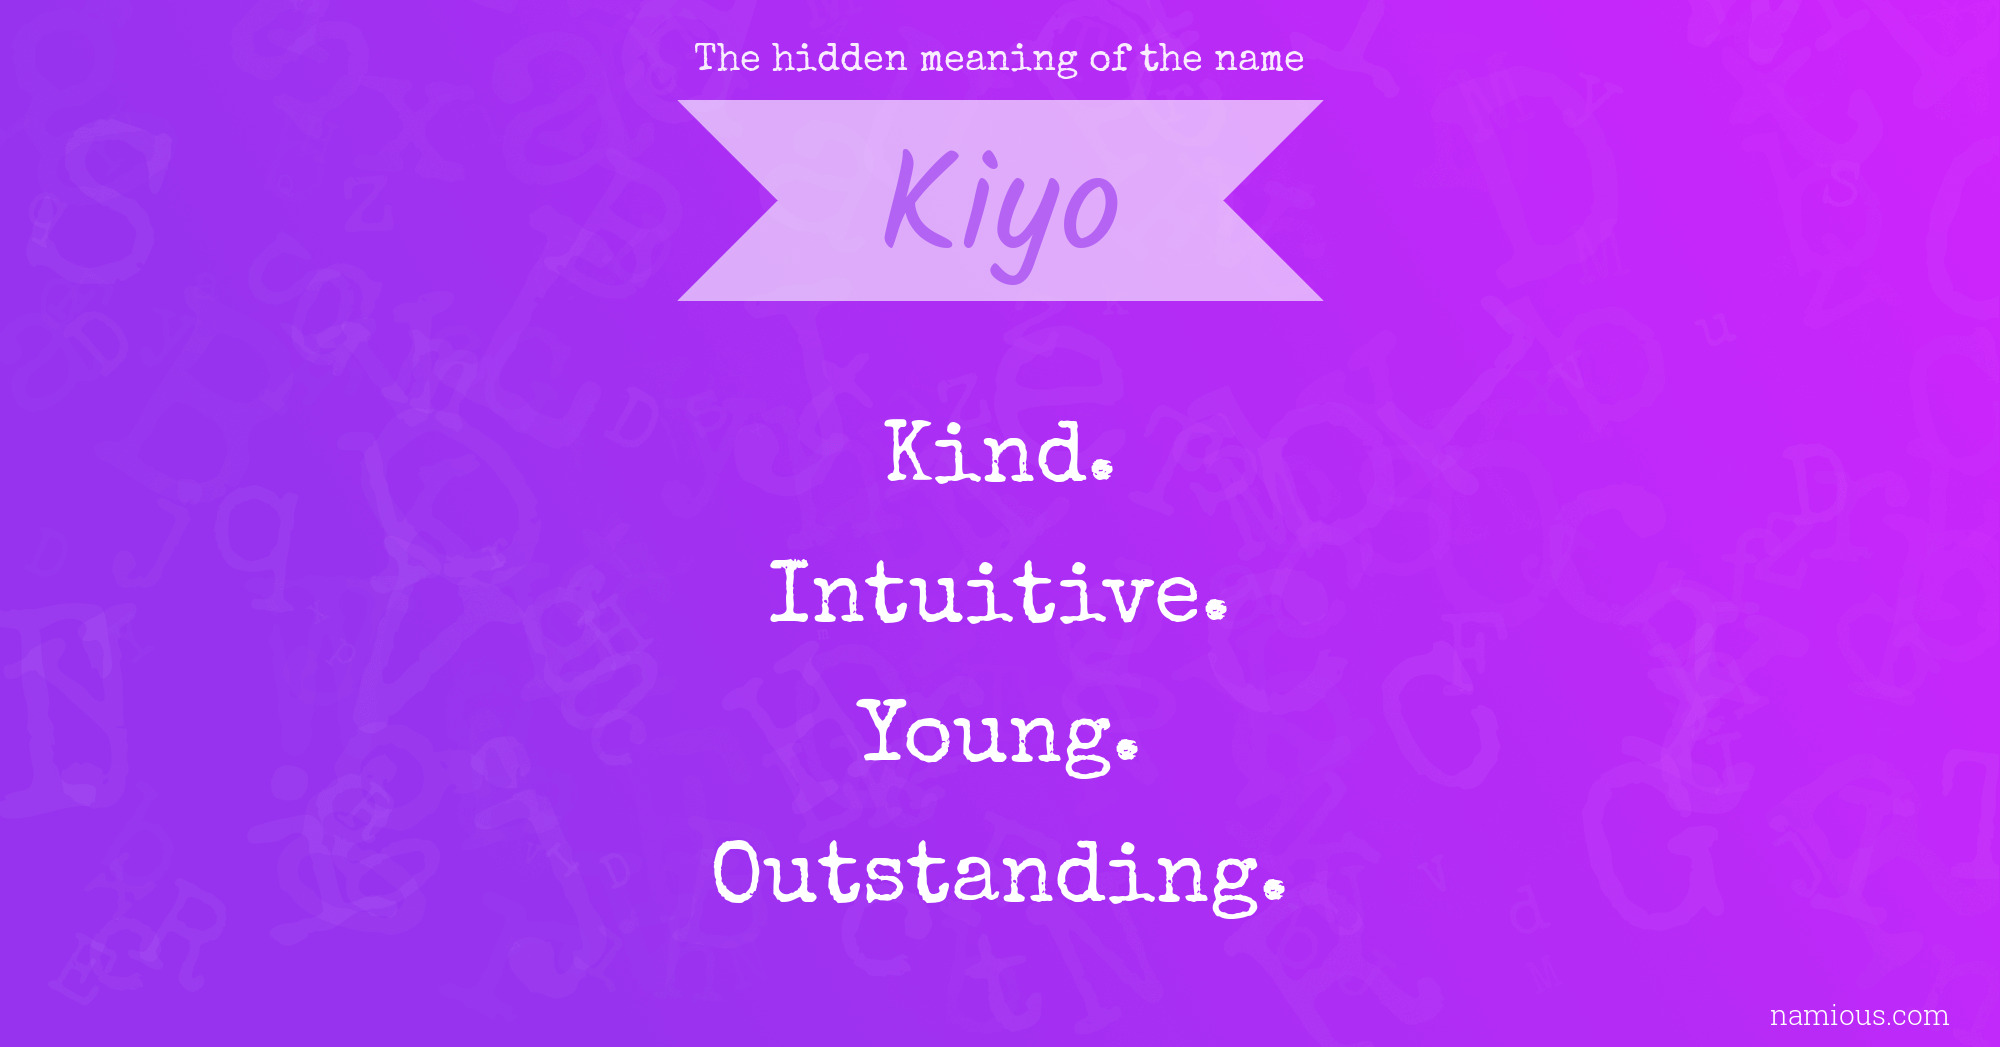 The hidden meaning of the name Kiyo